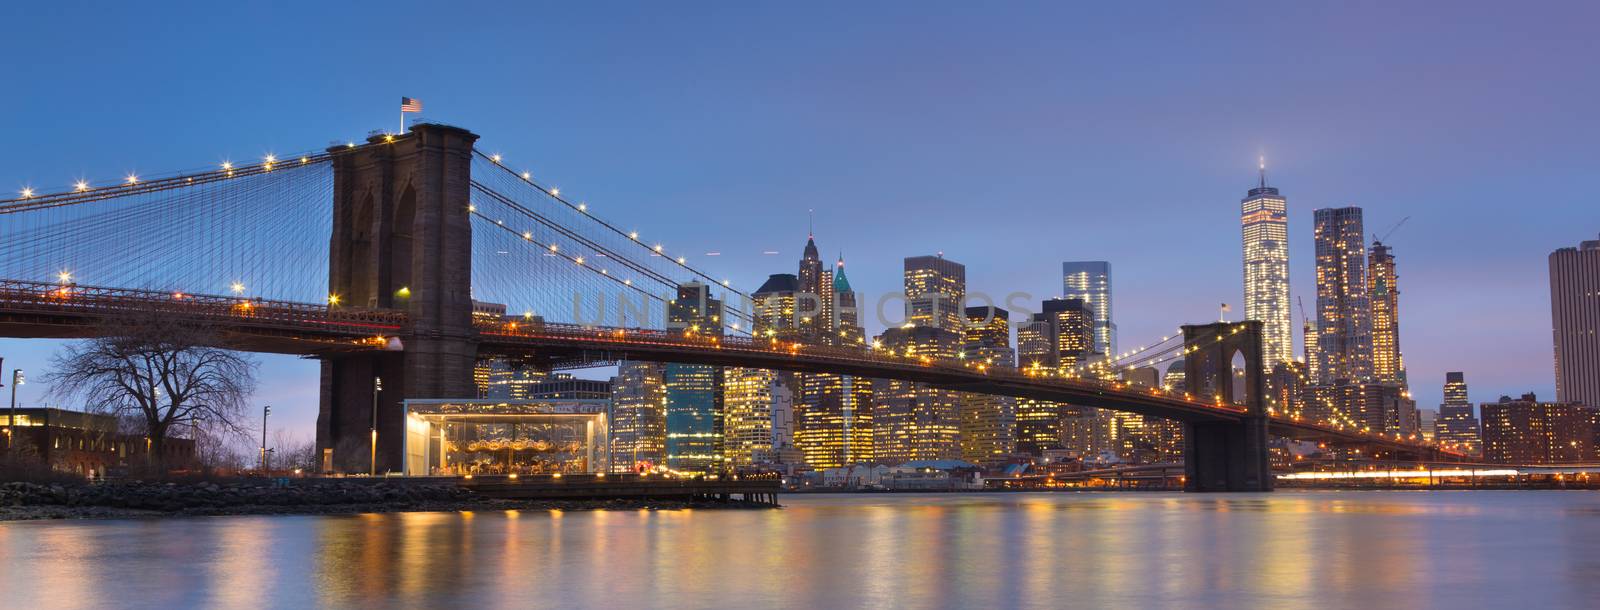 Brooklyn bridge and New York City Manhattan downtown skyline at dusk with skyscrapers illuminated over East River panorama. 